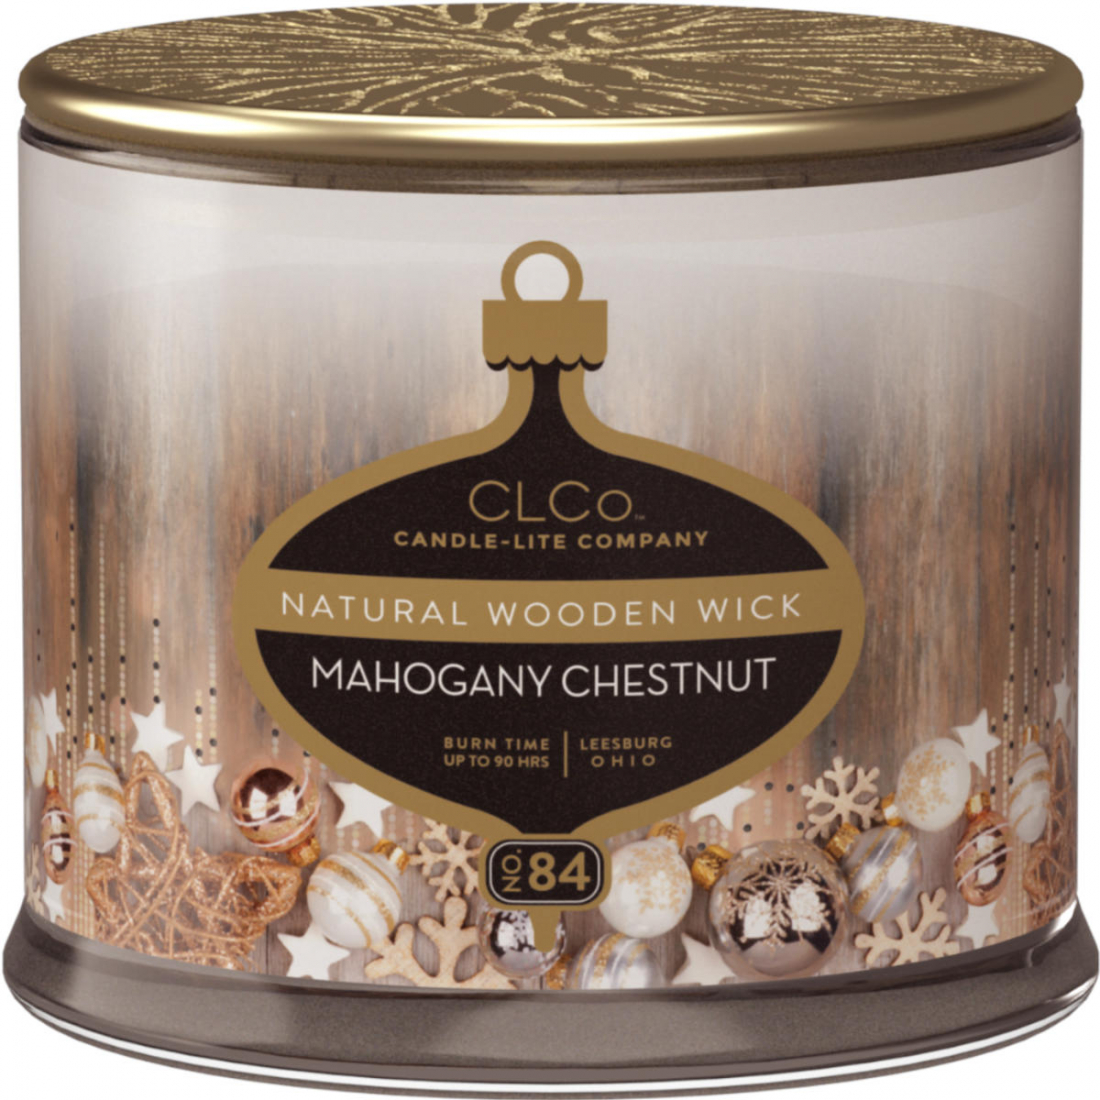 'Mahogany Chestnut' Scented Candle - 396 g